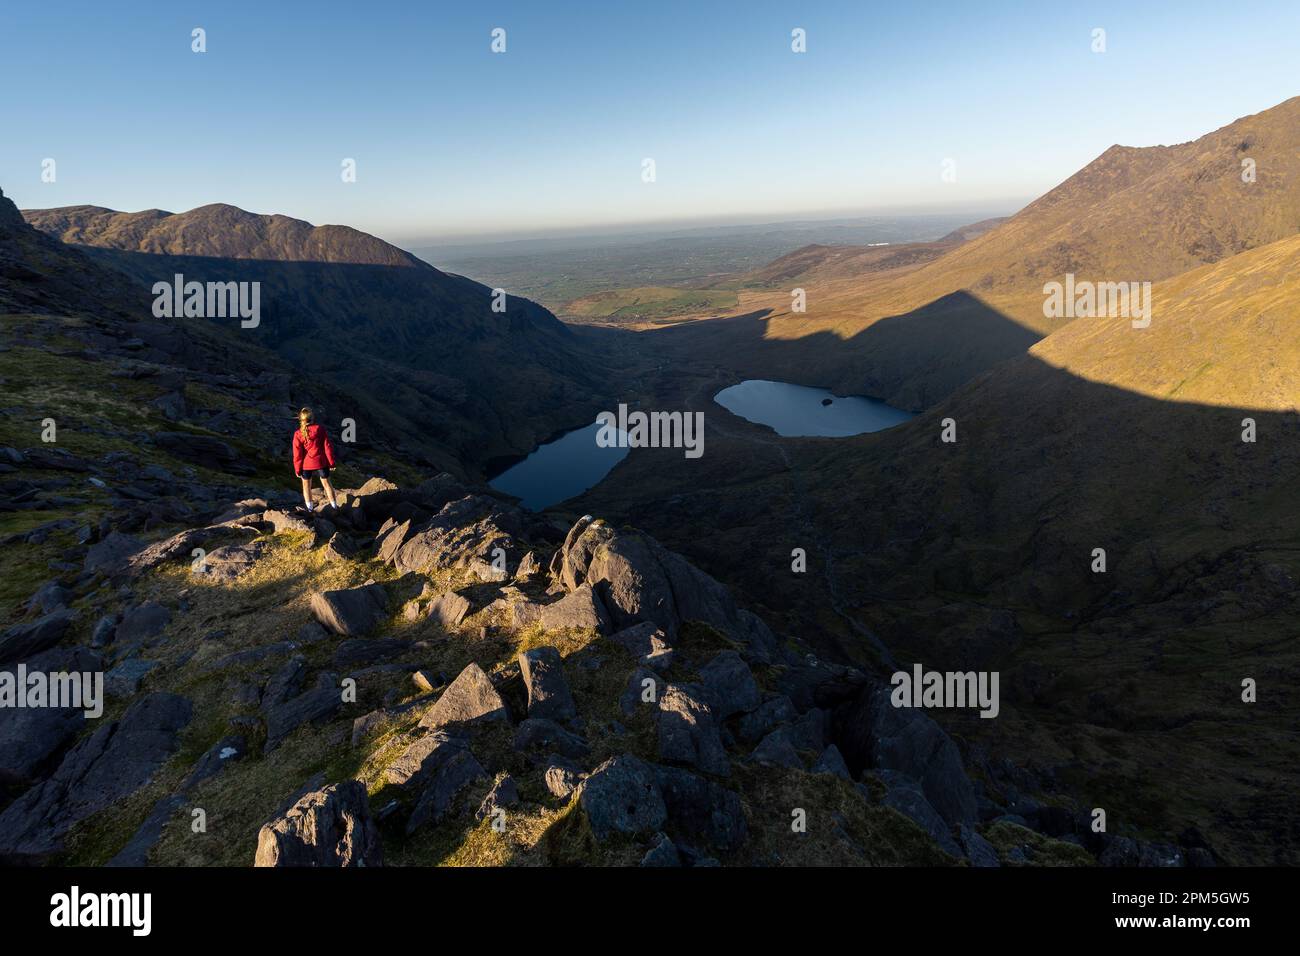 Woman on top of mountain with two lakes in the background Stock Photo